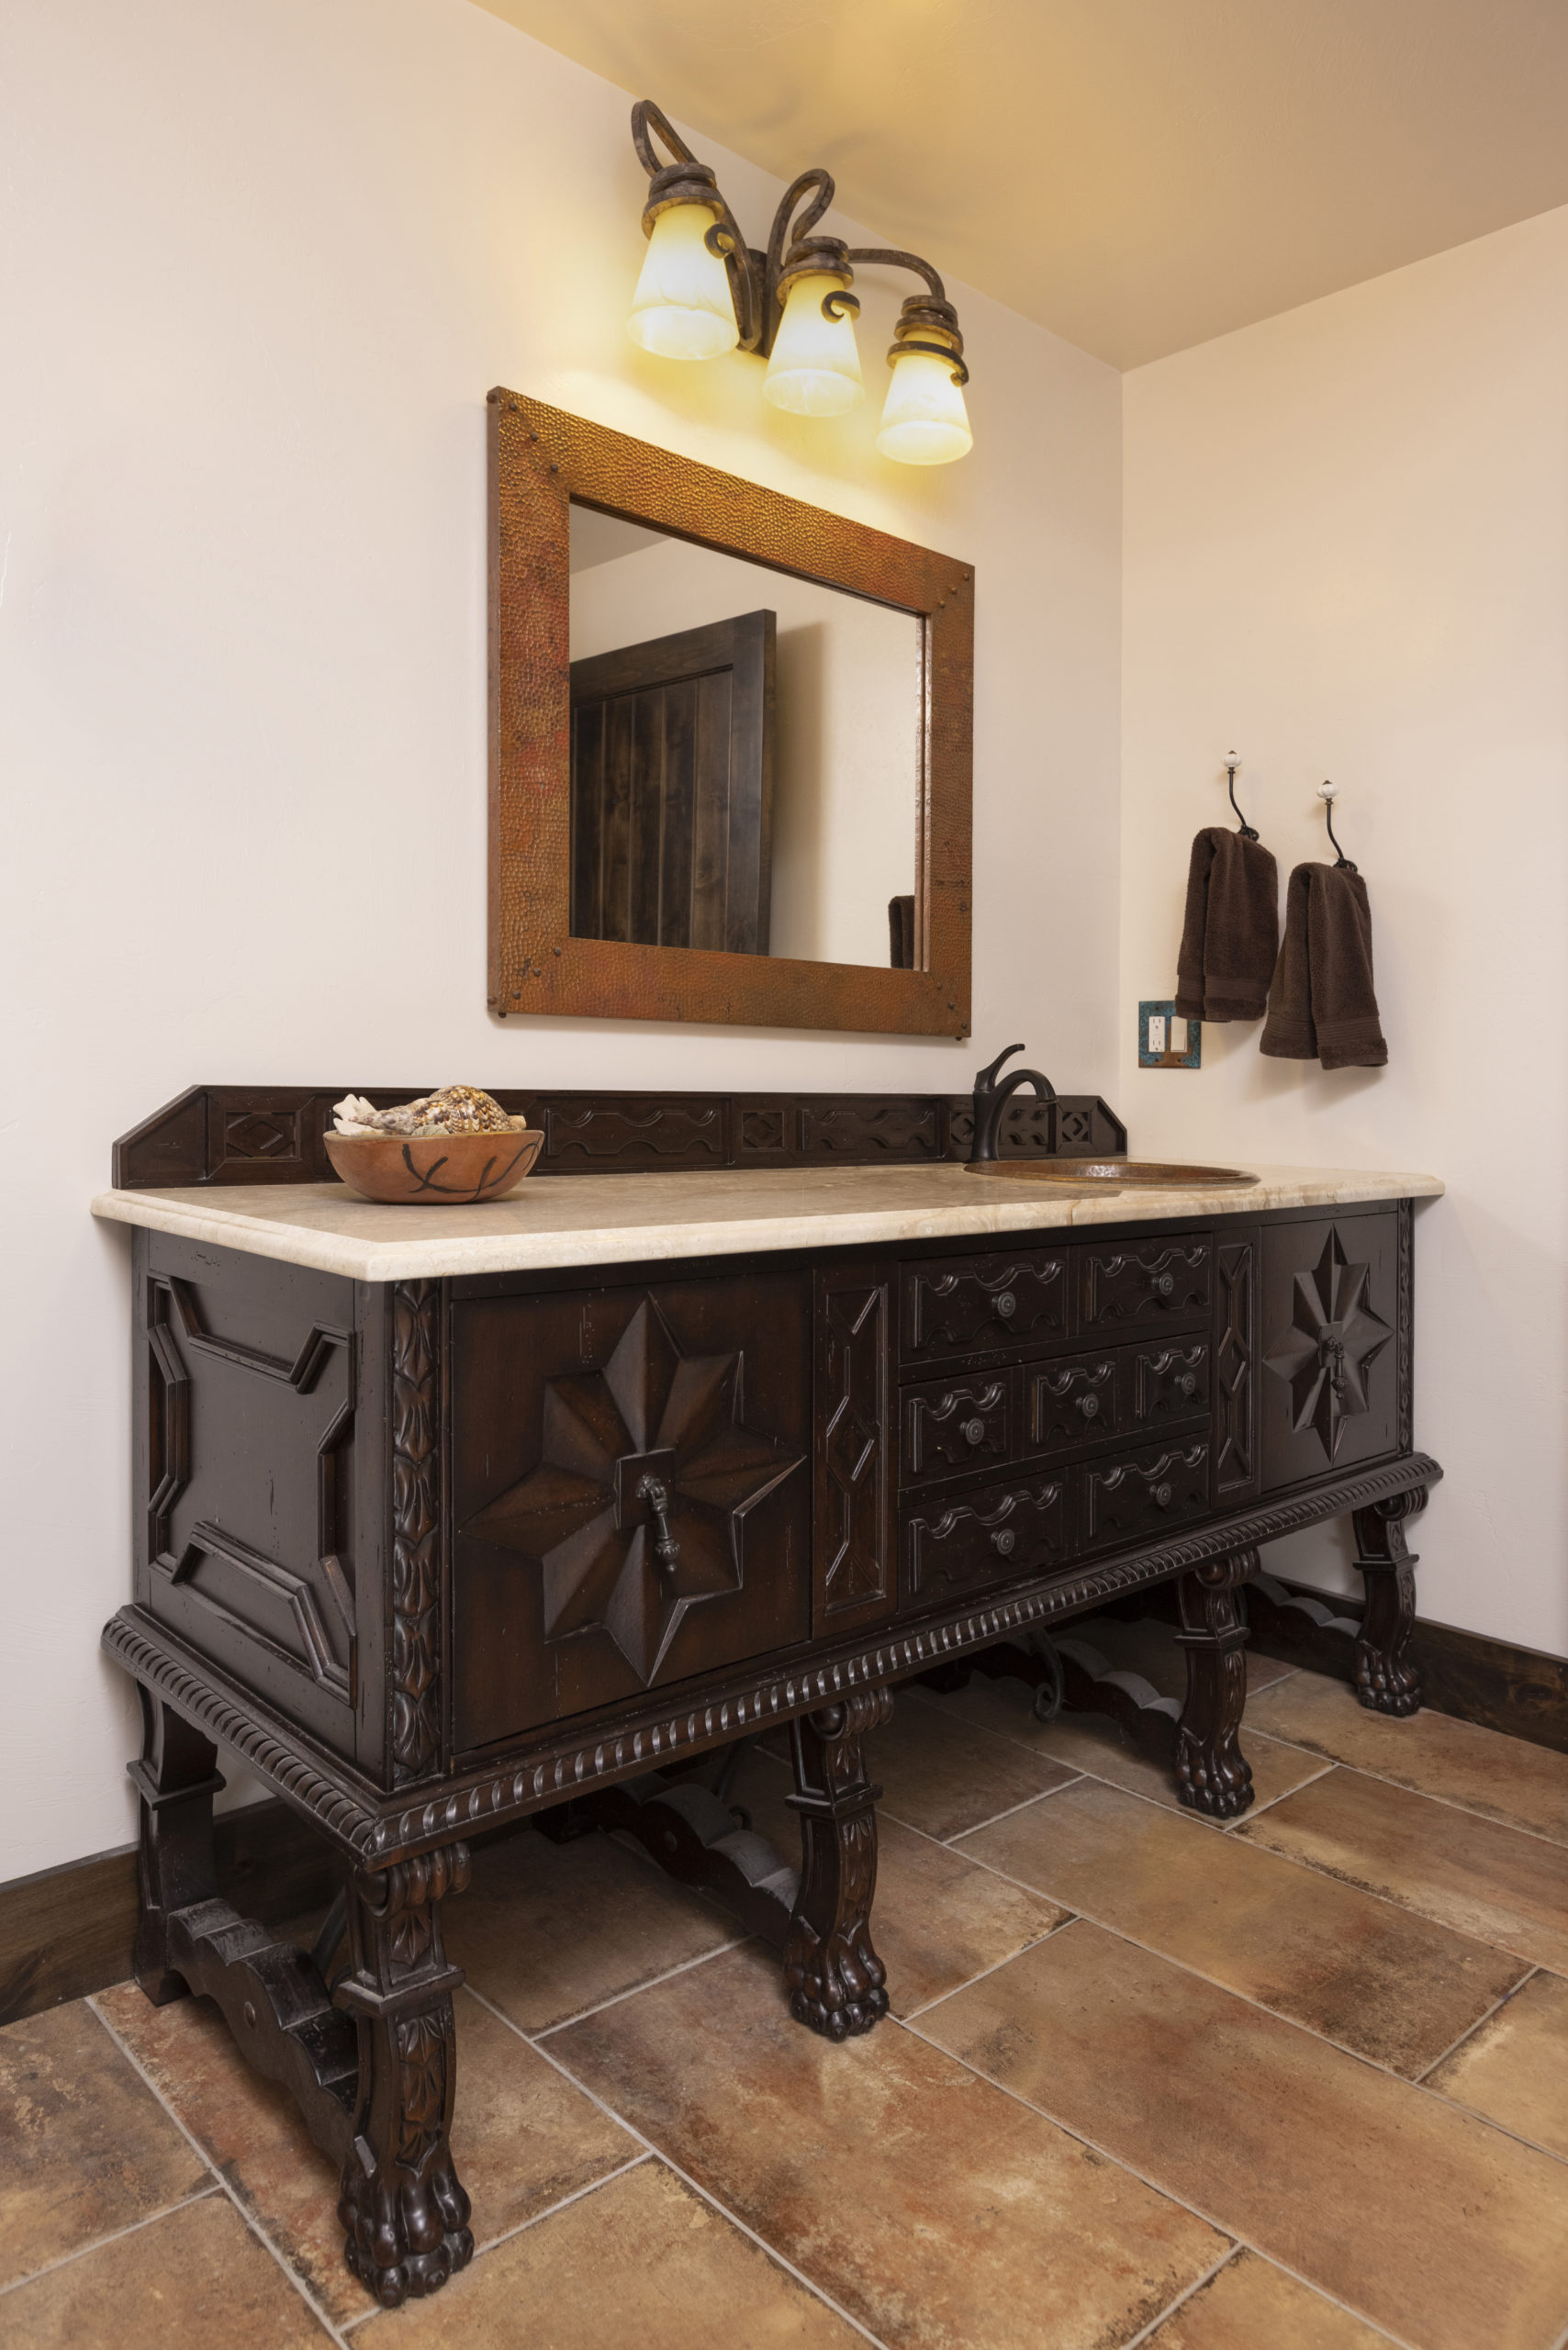 guest bath with custom carved wood vanity, copper sink and copper mirror